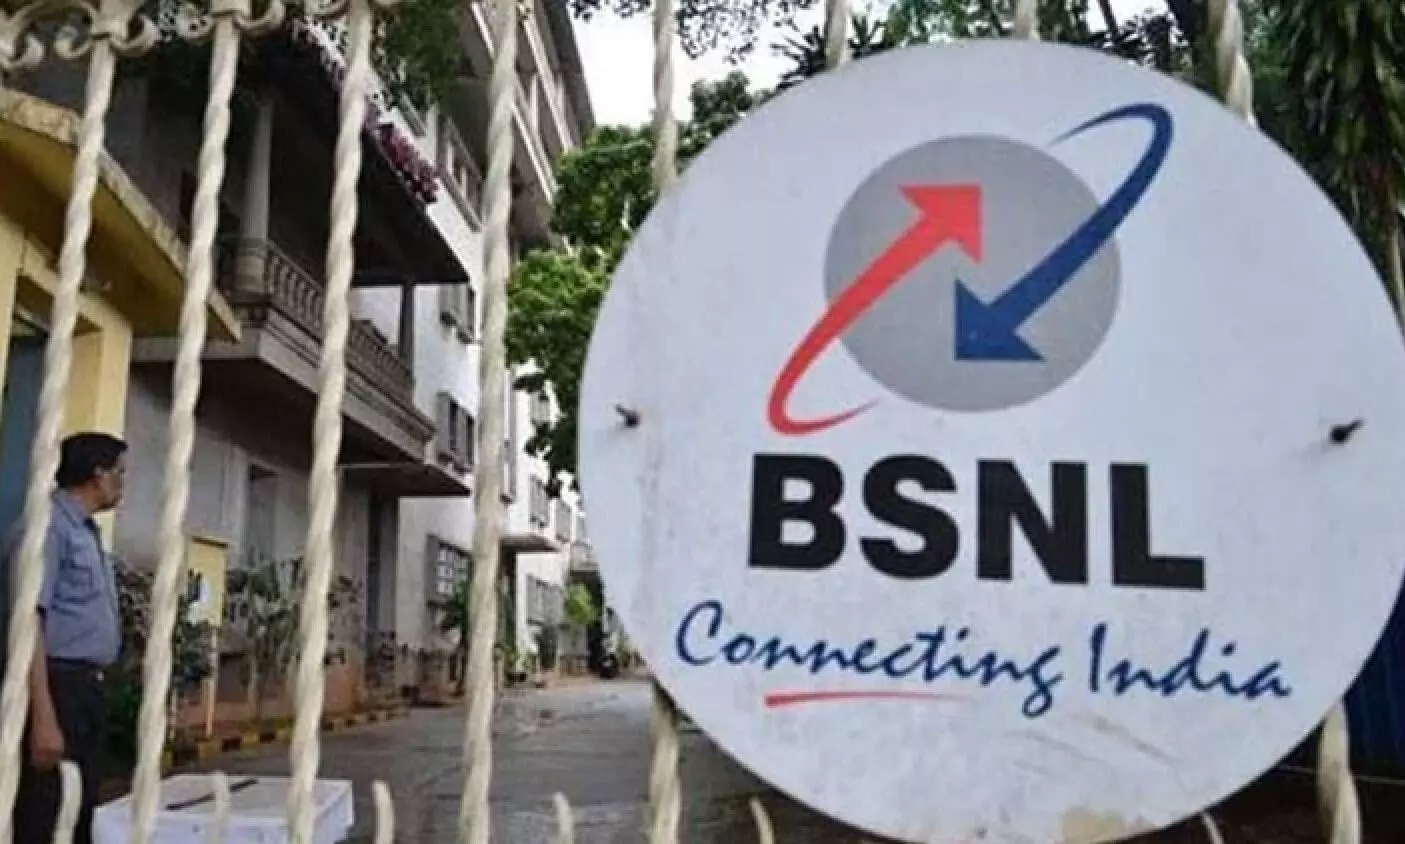 Boycott China: BSNL sources 53% of mobile network equipment from China